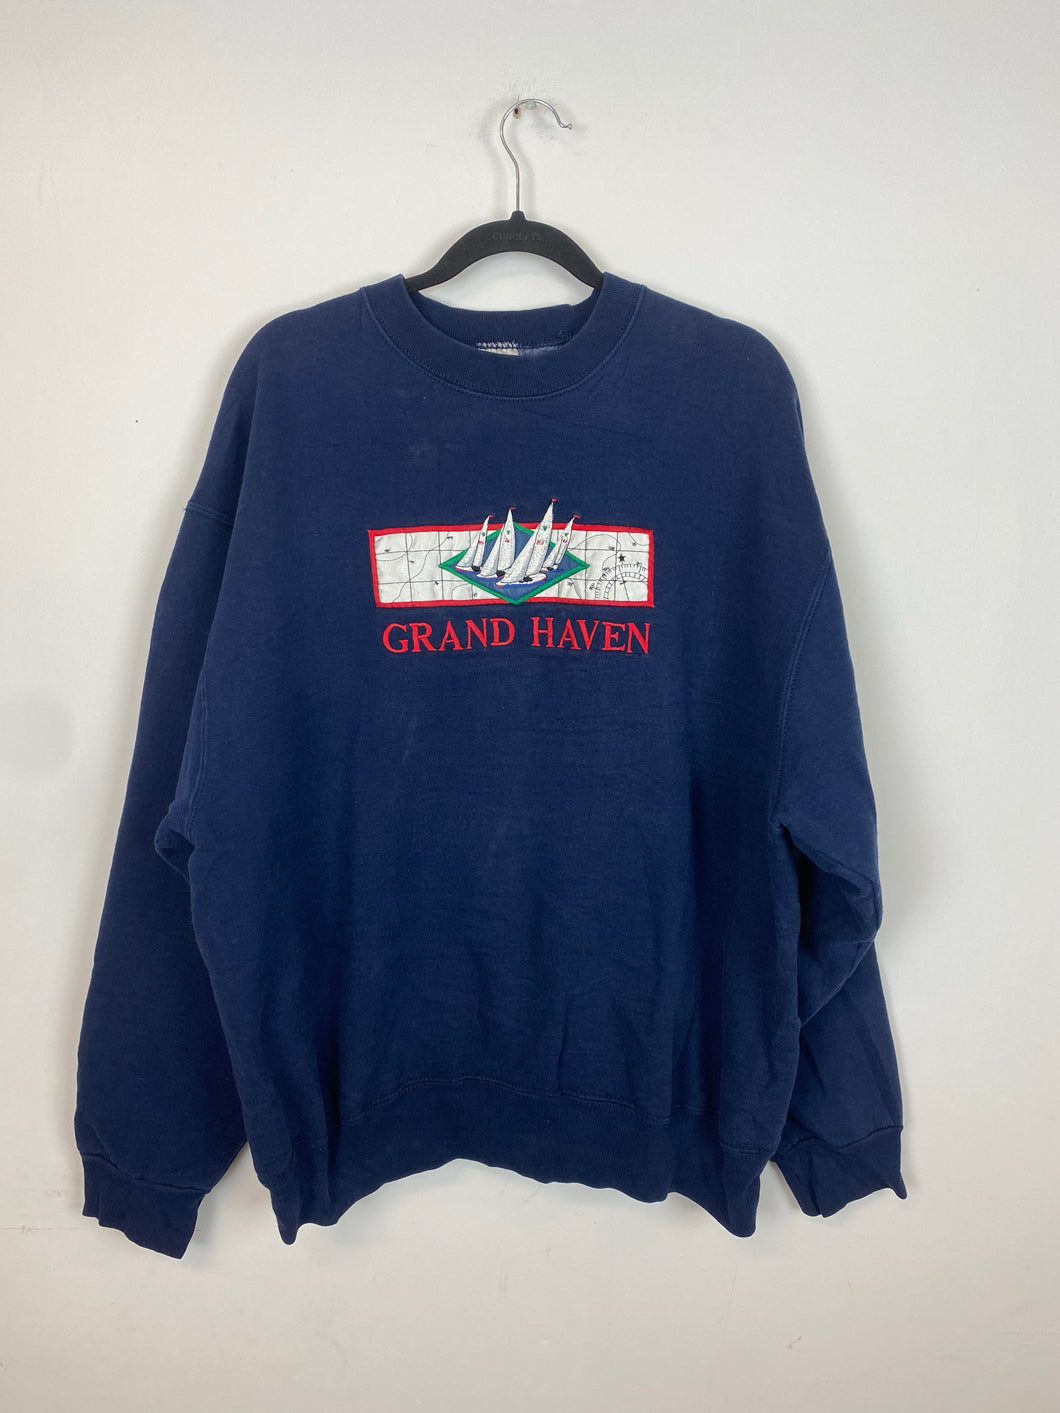 Embroidered Grand Haven Boating crewneck - M